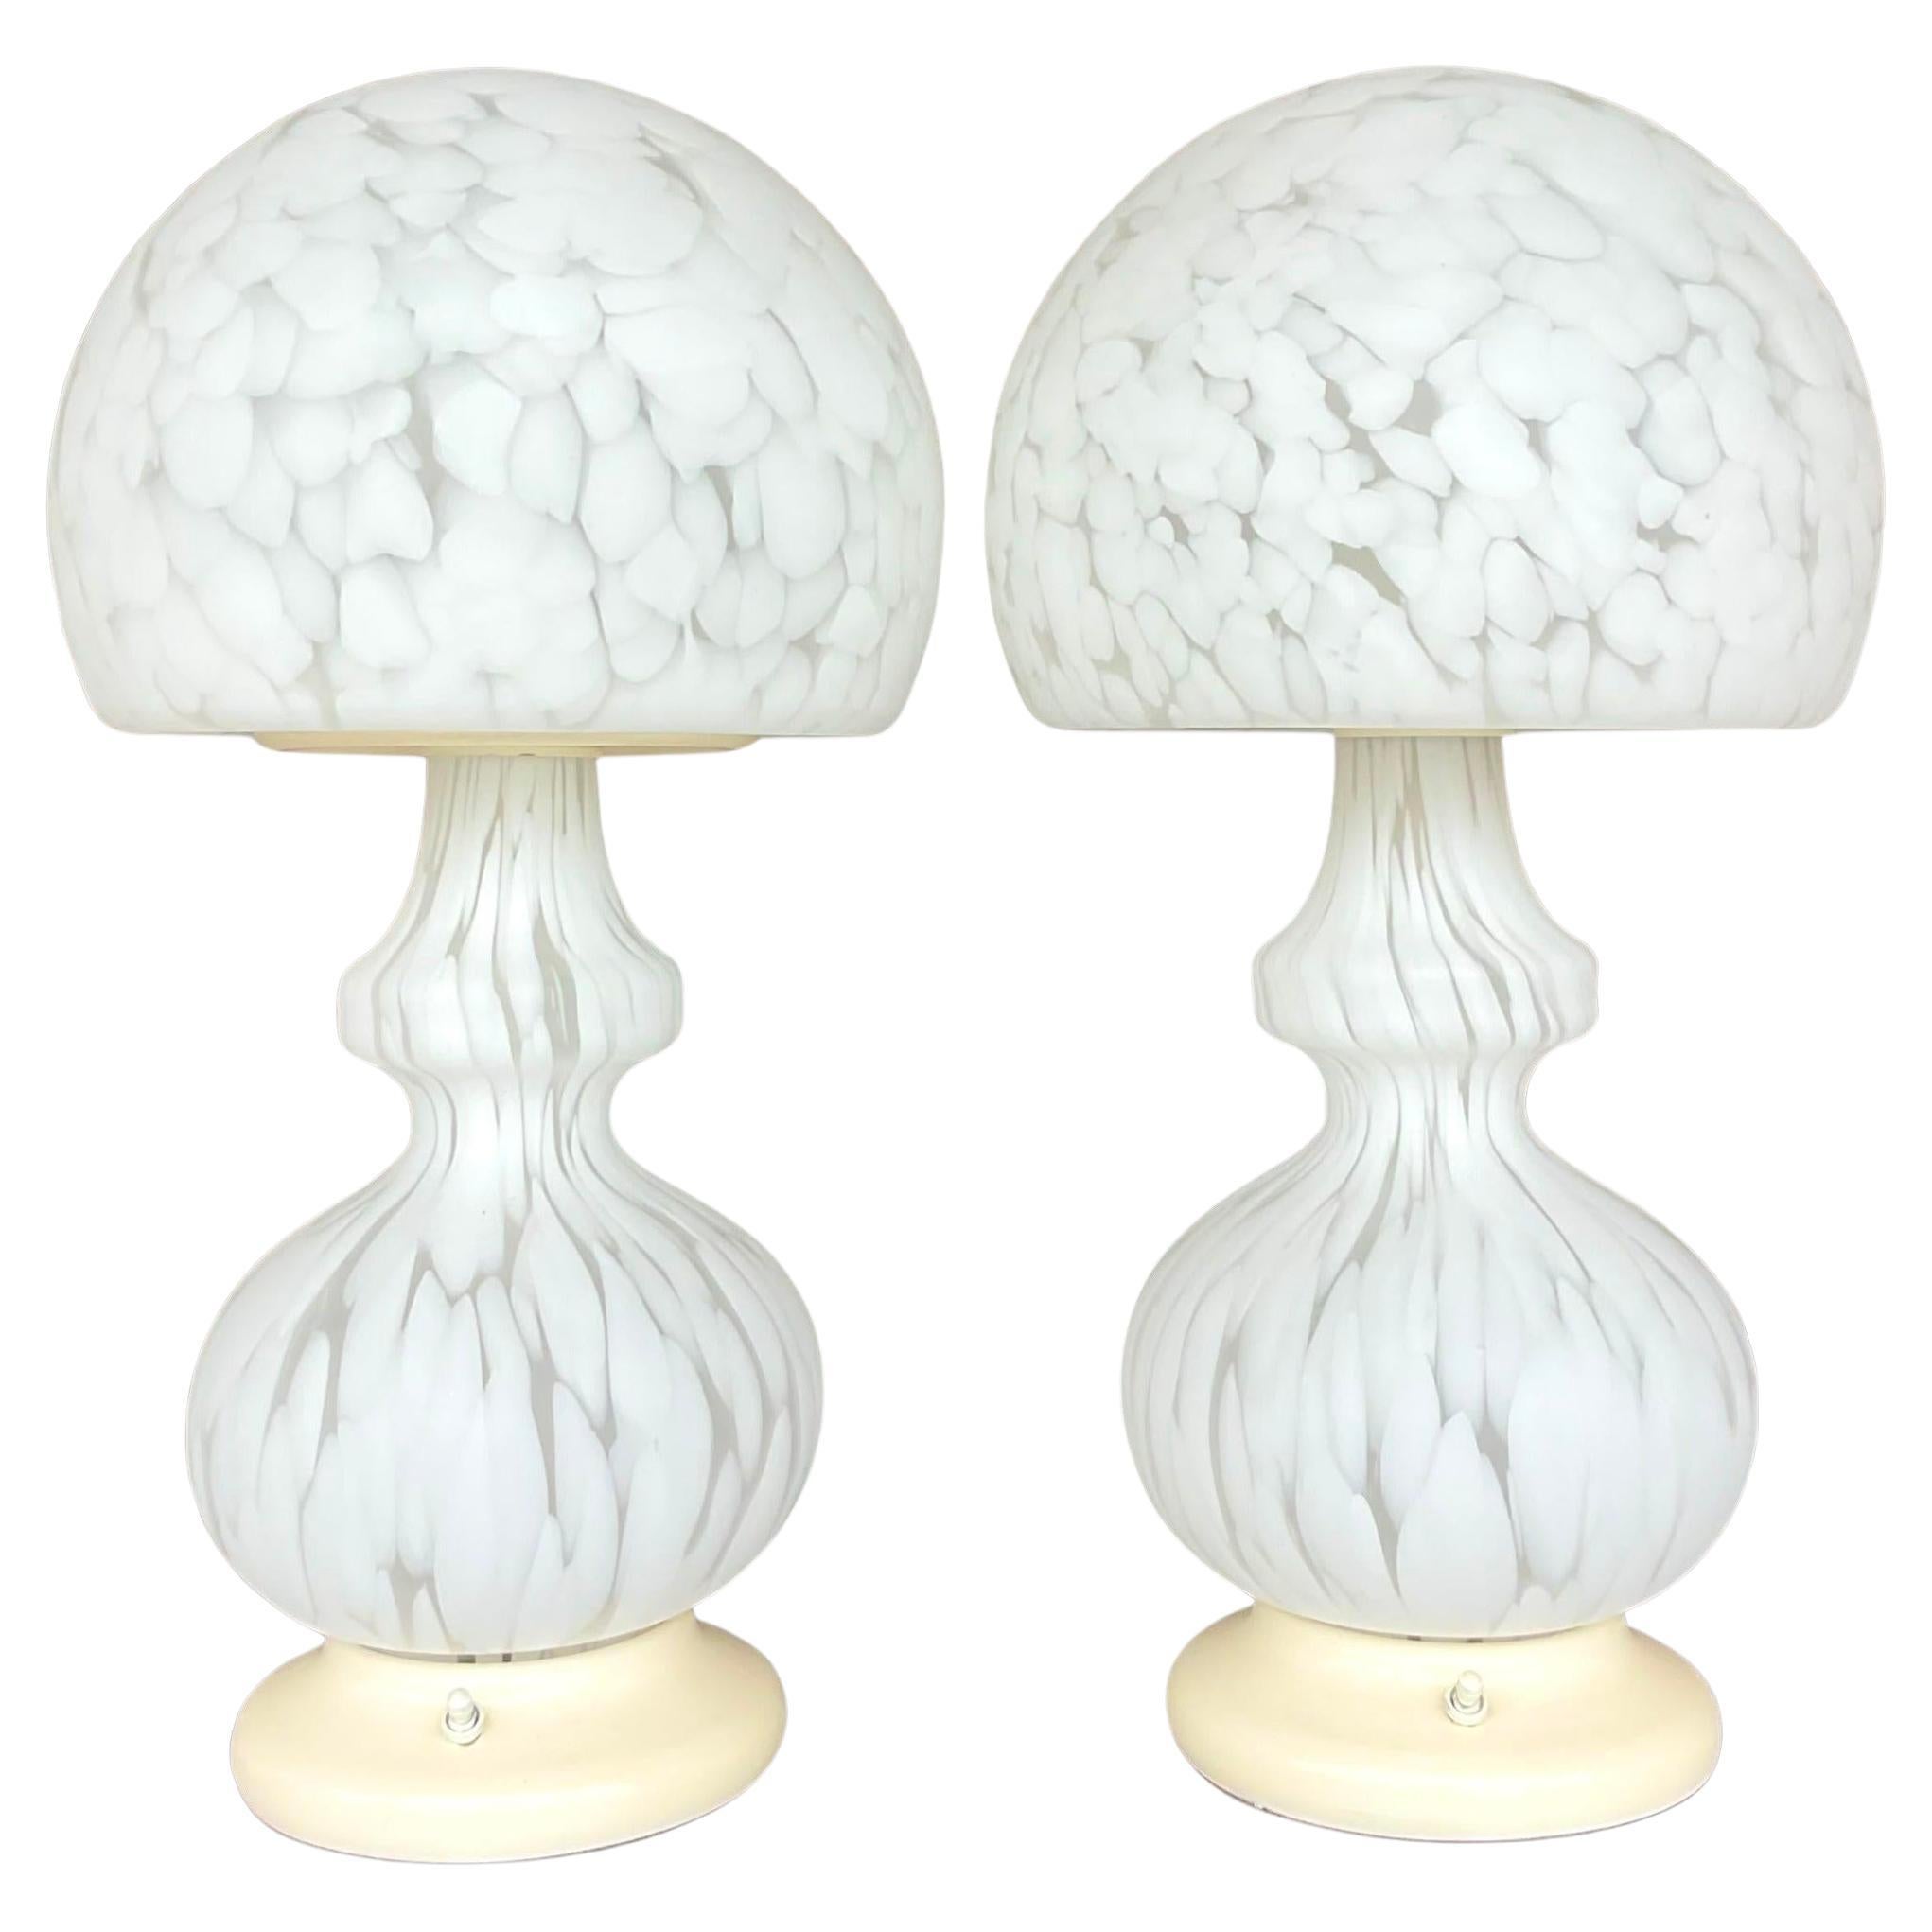 Vintage Globe Lamps After Murano for Someroso for Laurel Lighting - a Pair